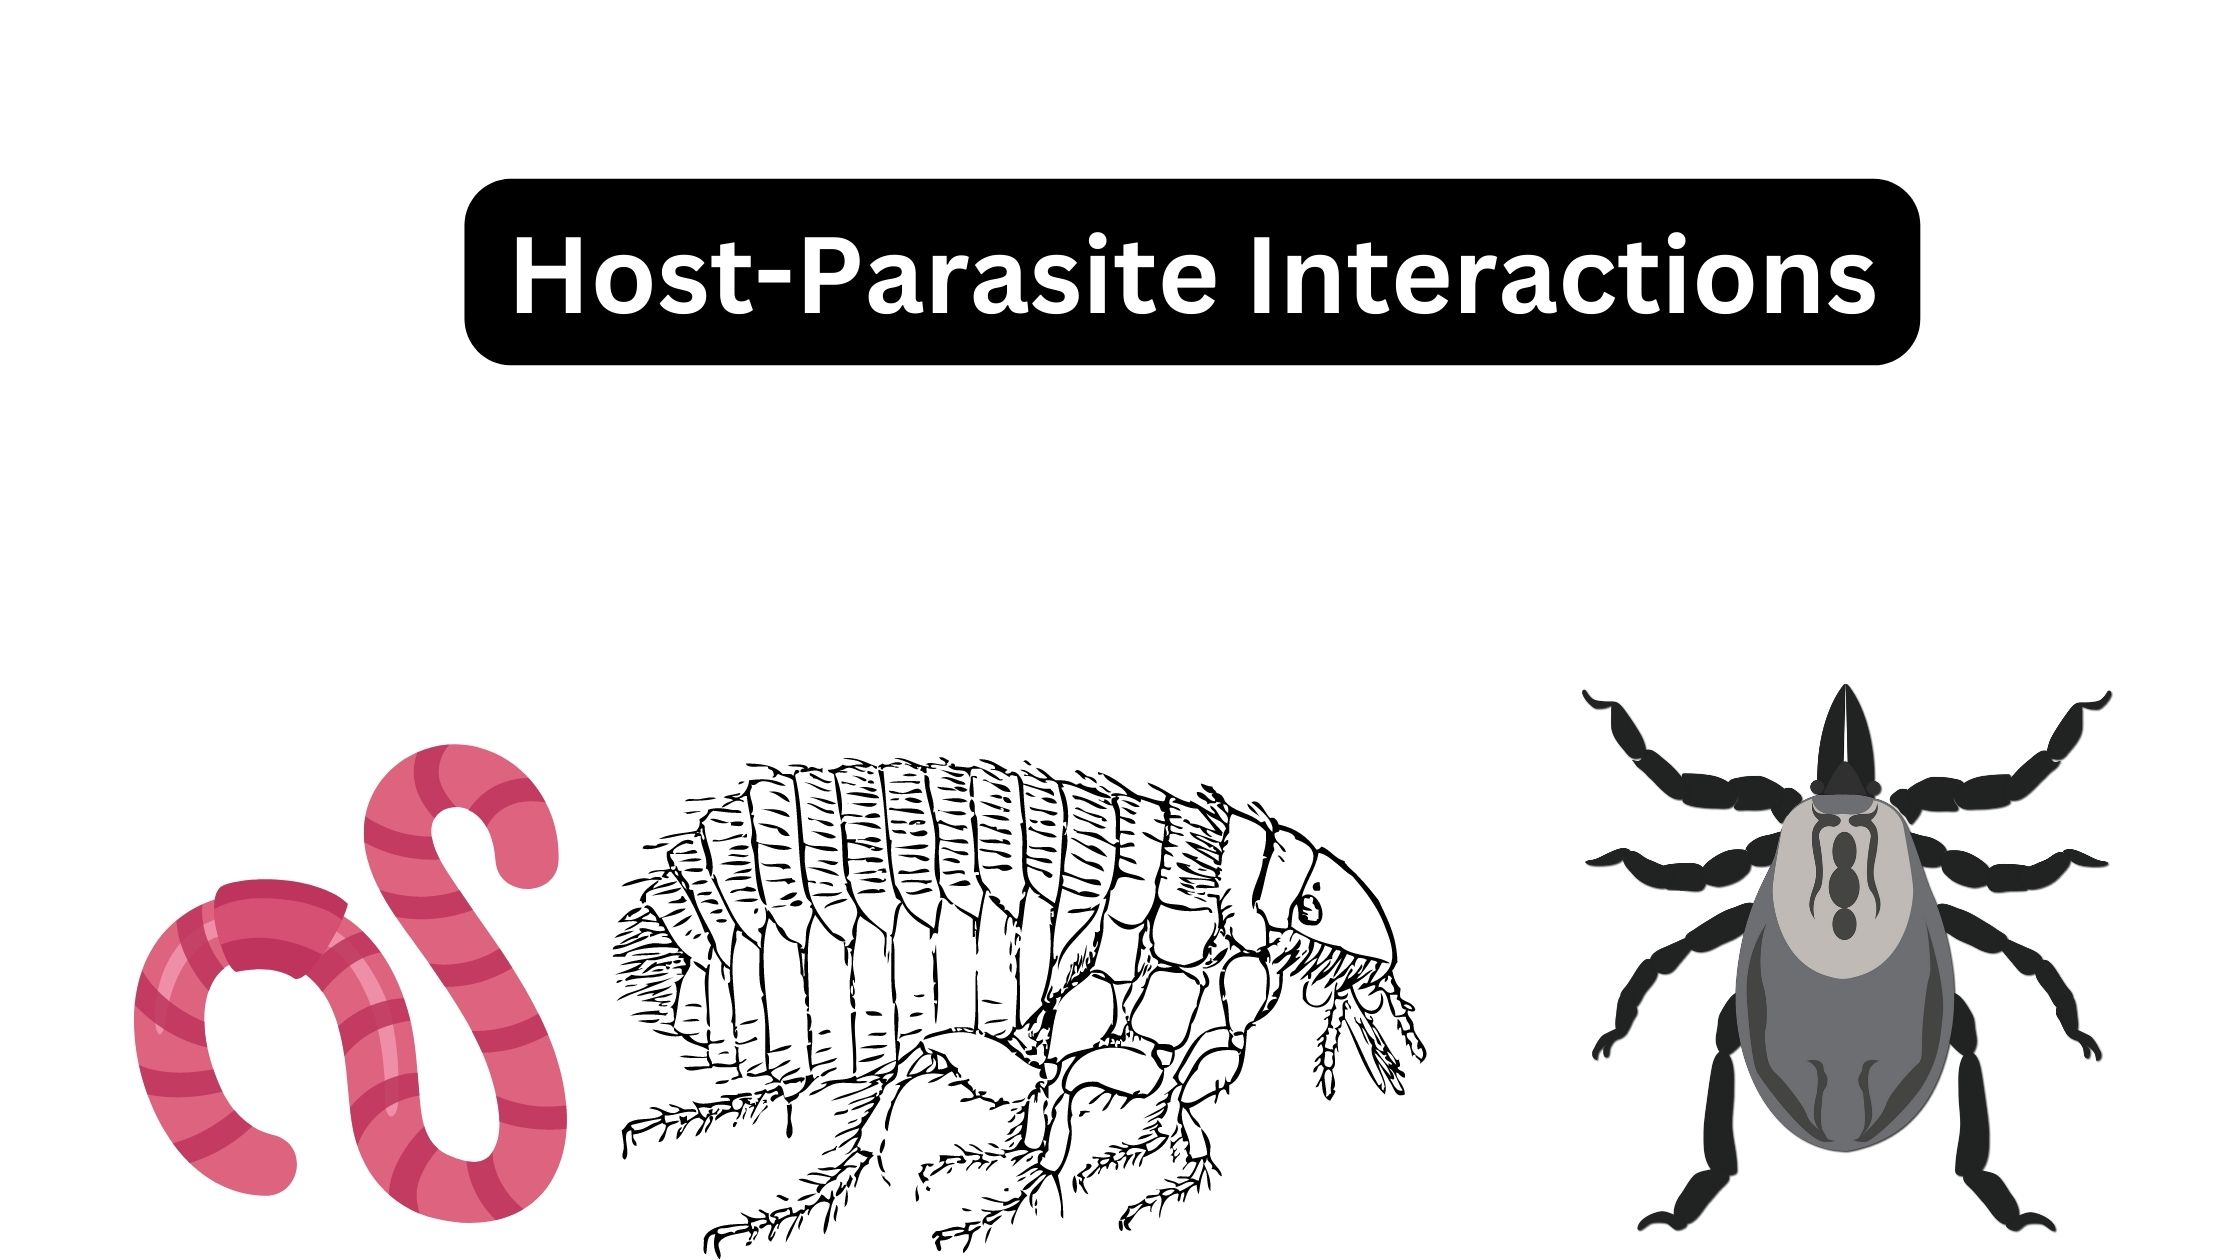 Host-Parasite Interactions